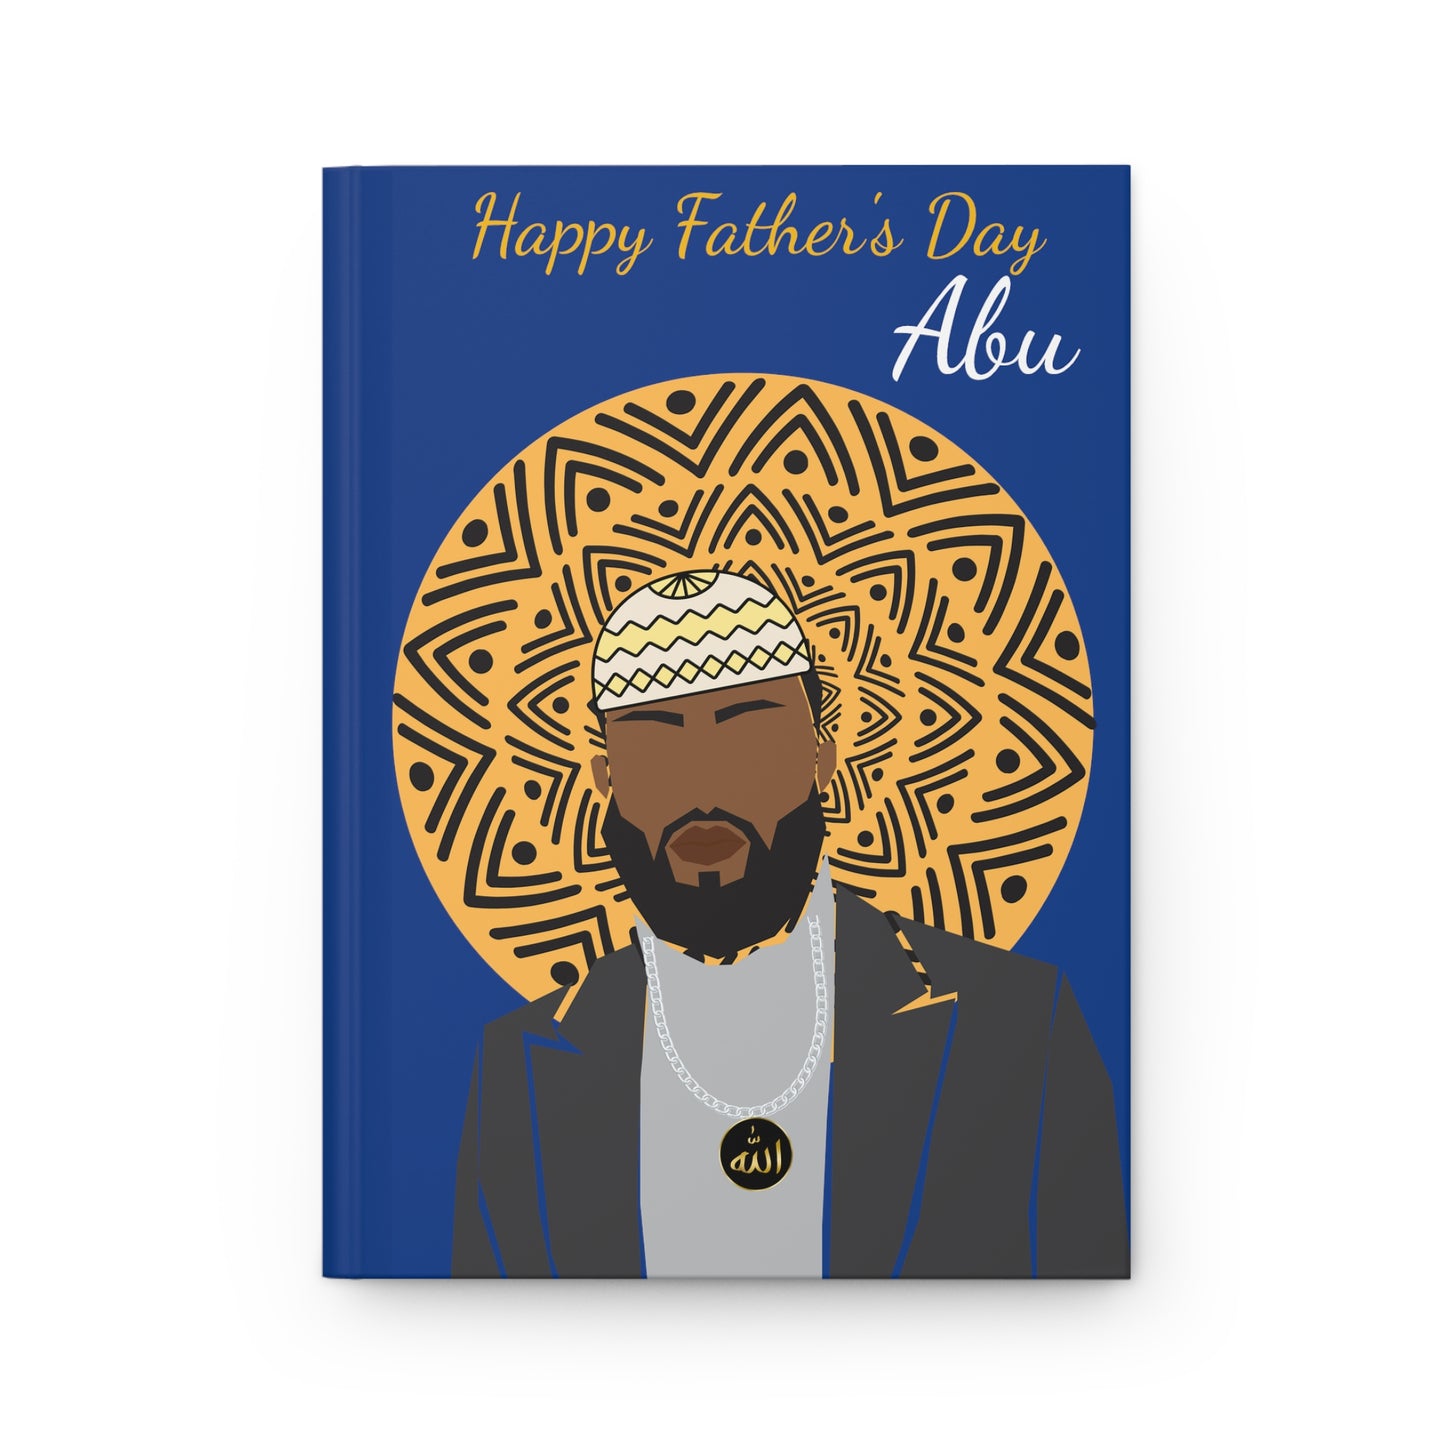 Happy Father's Day Abu Hardcover Journal Matte